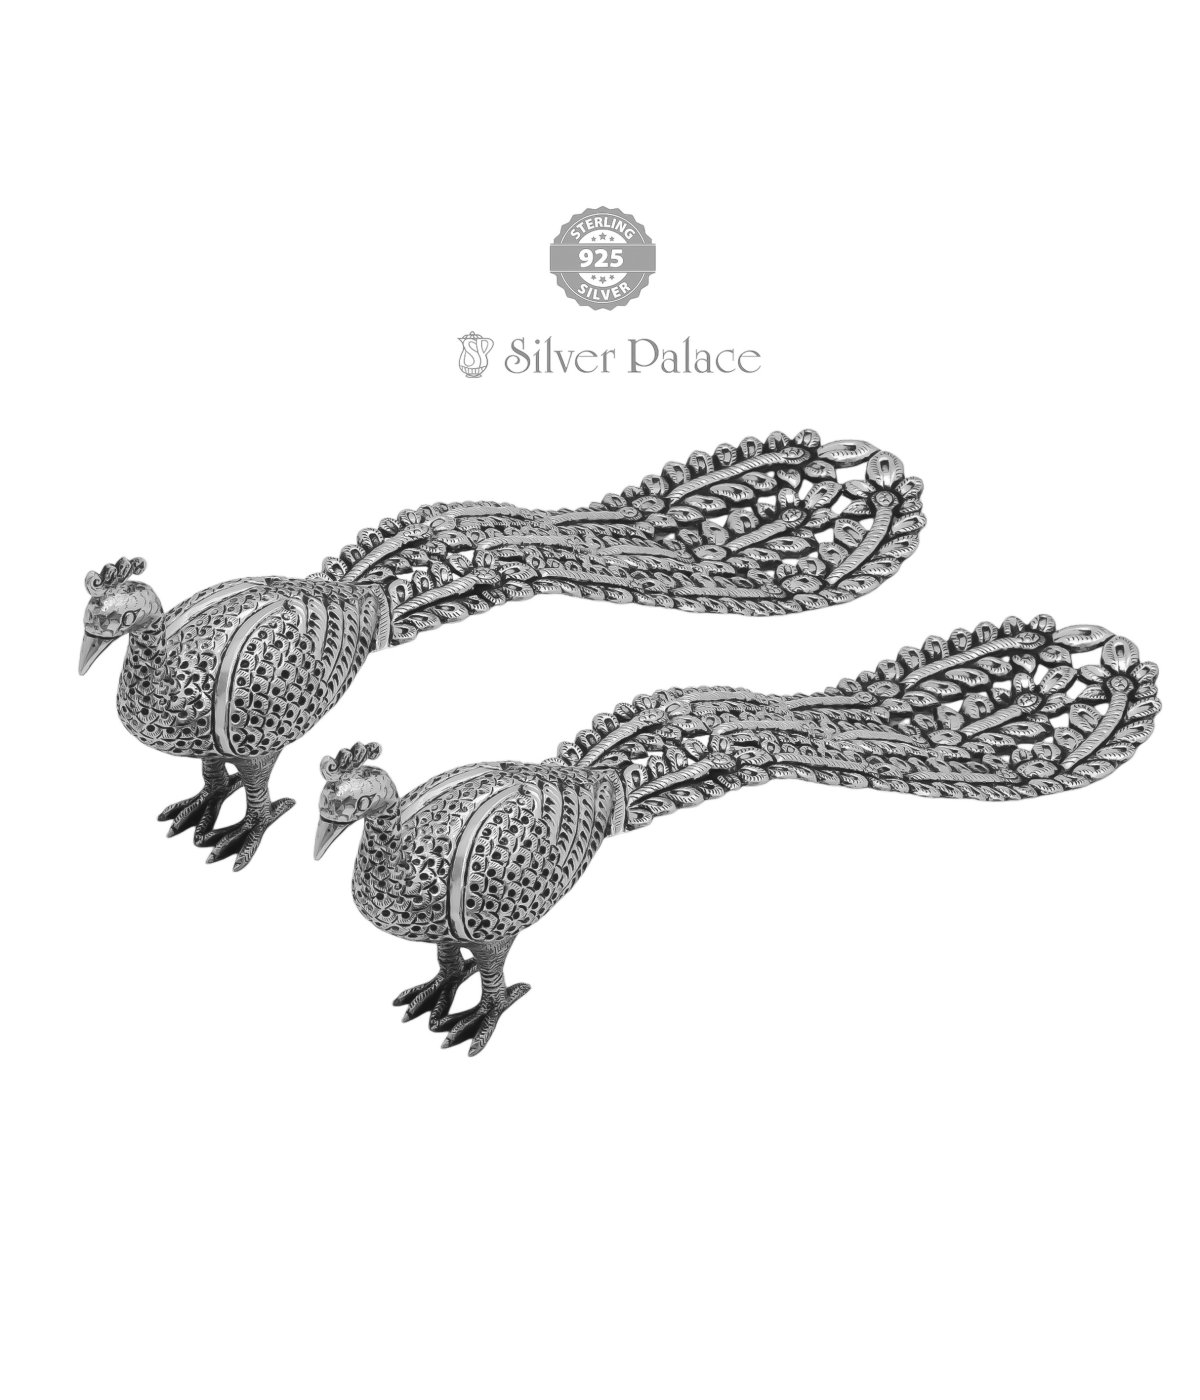 925 SILVER HANS COLLECTIONS HAND CRAFTED PEACOCK SHOWPIECE FOR HOME DECOR 